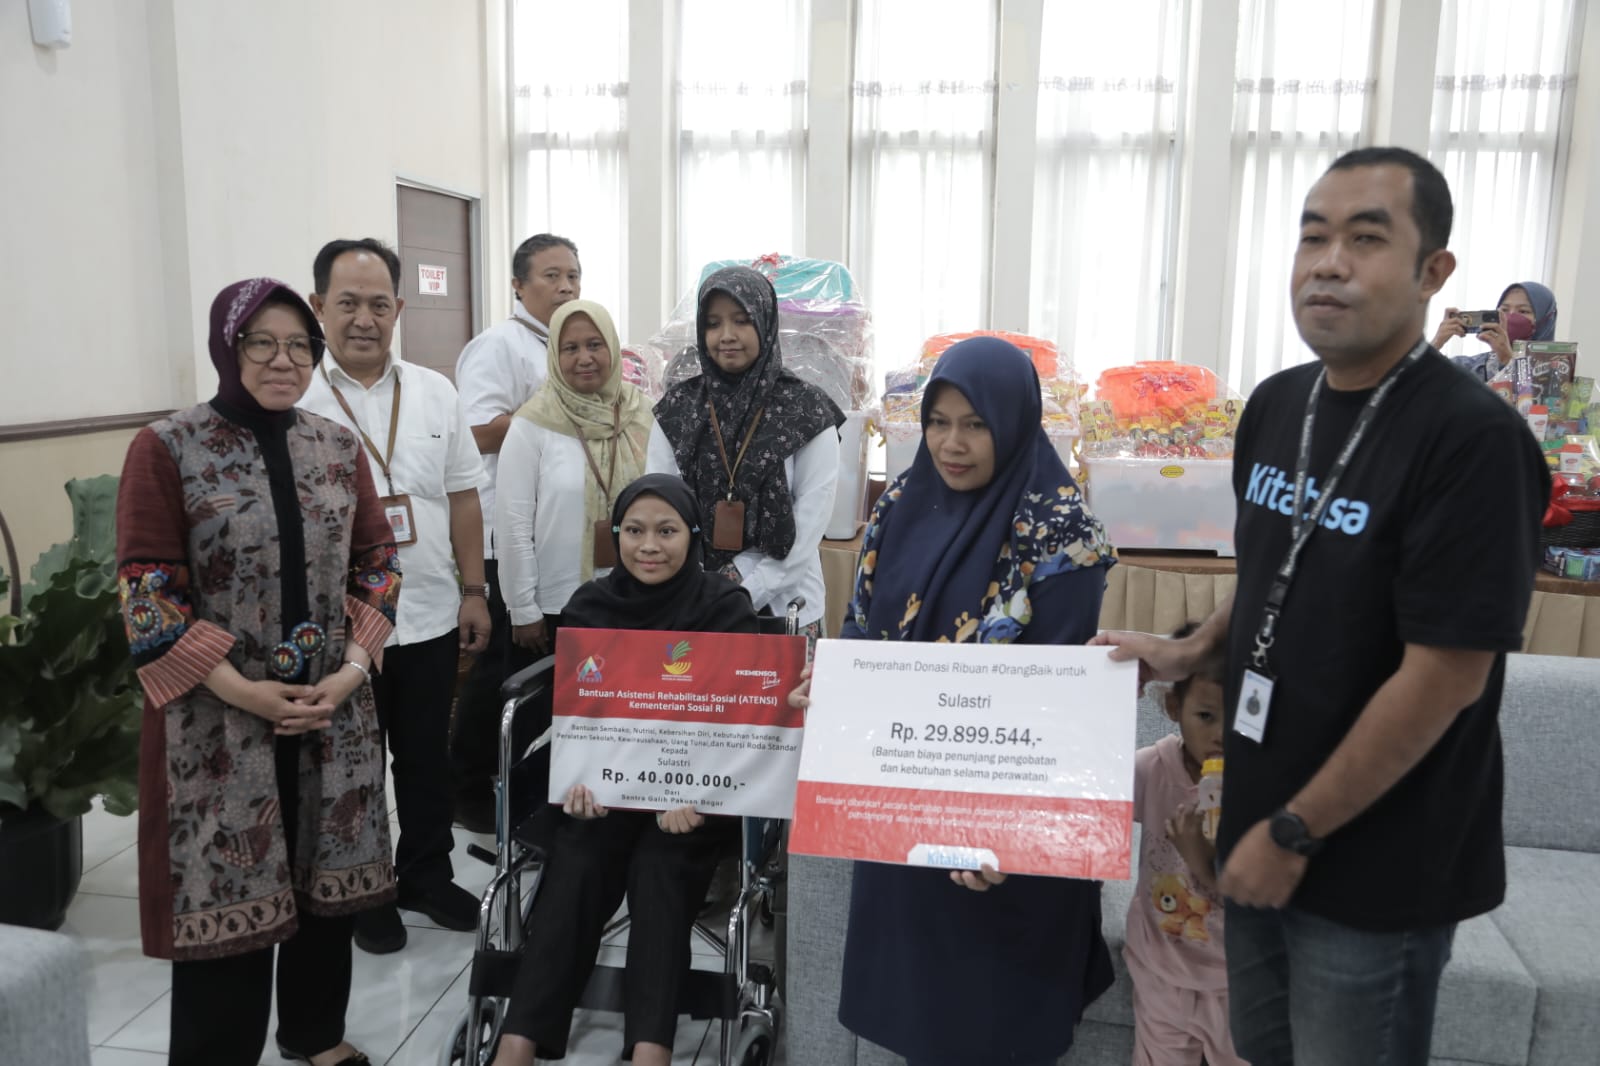 Ministry of Social Affairs Provides Assistance for Children and a Teenager at STPL Bekasi